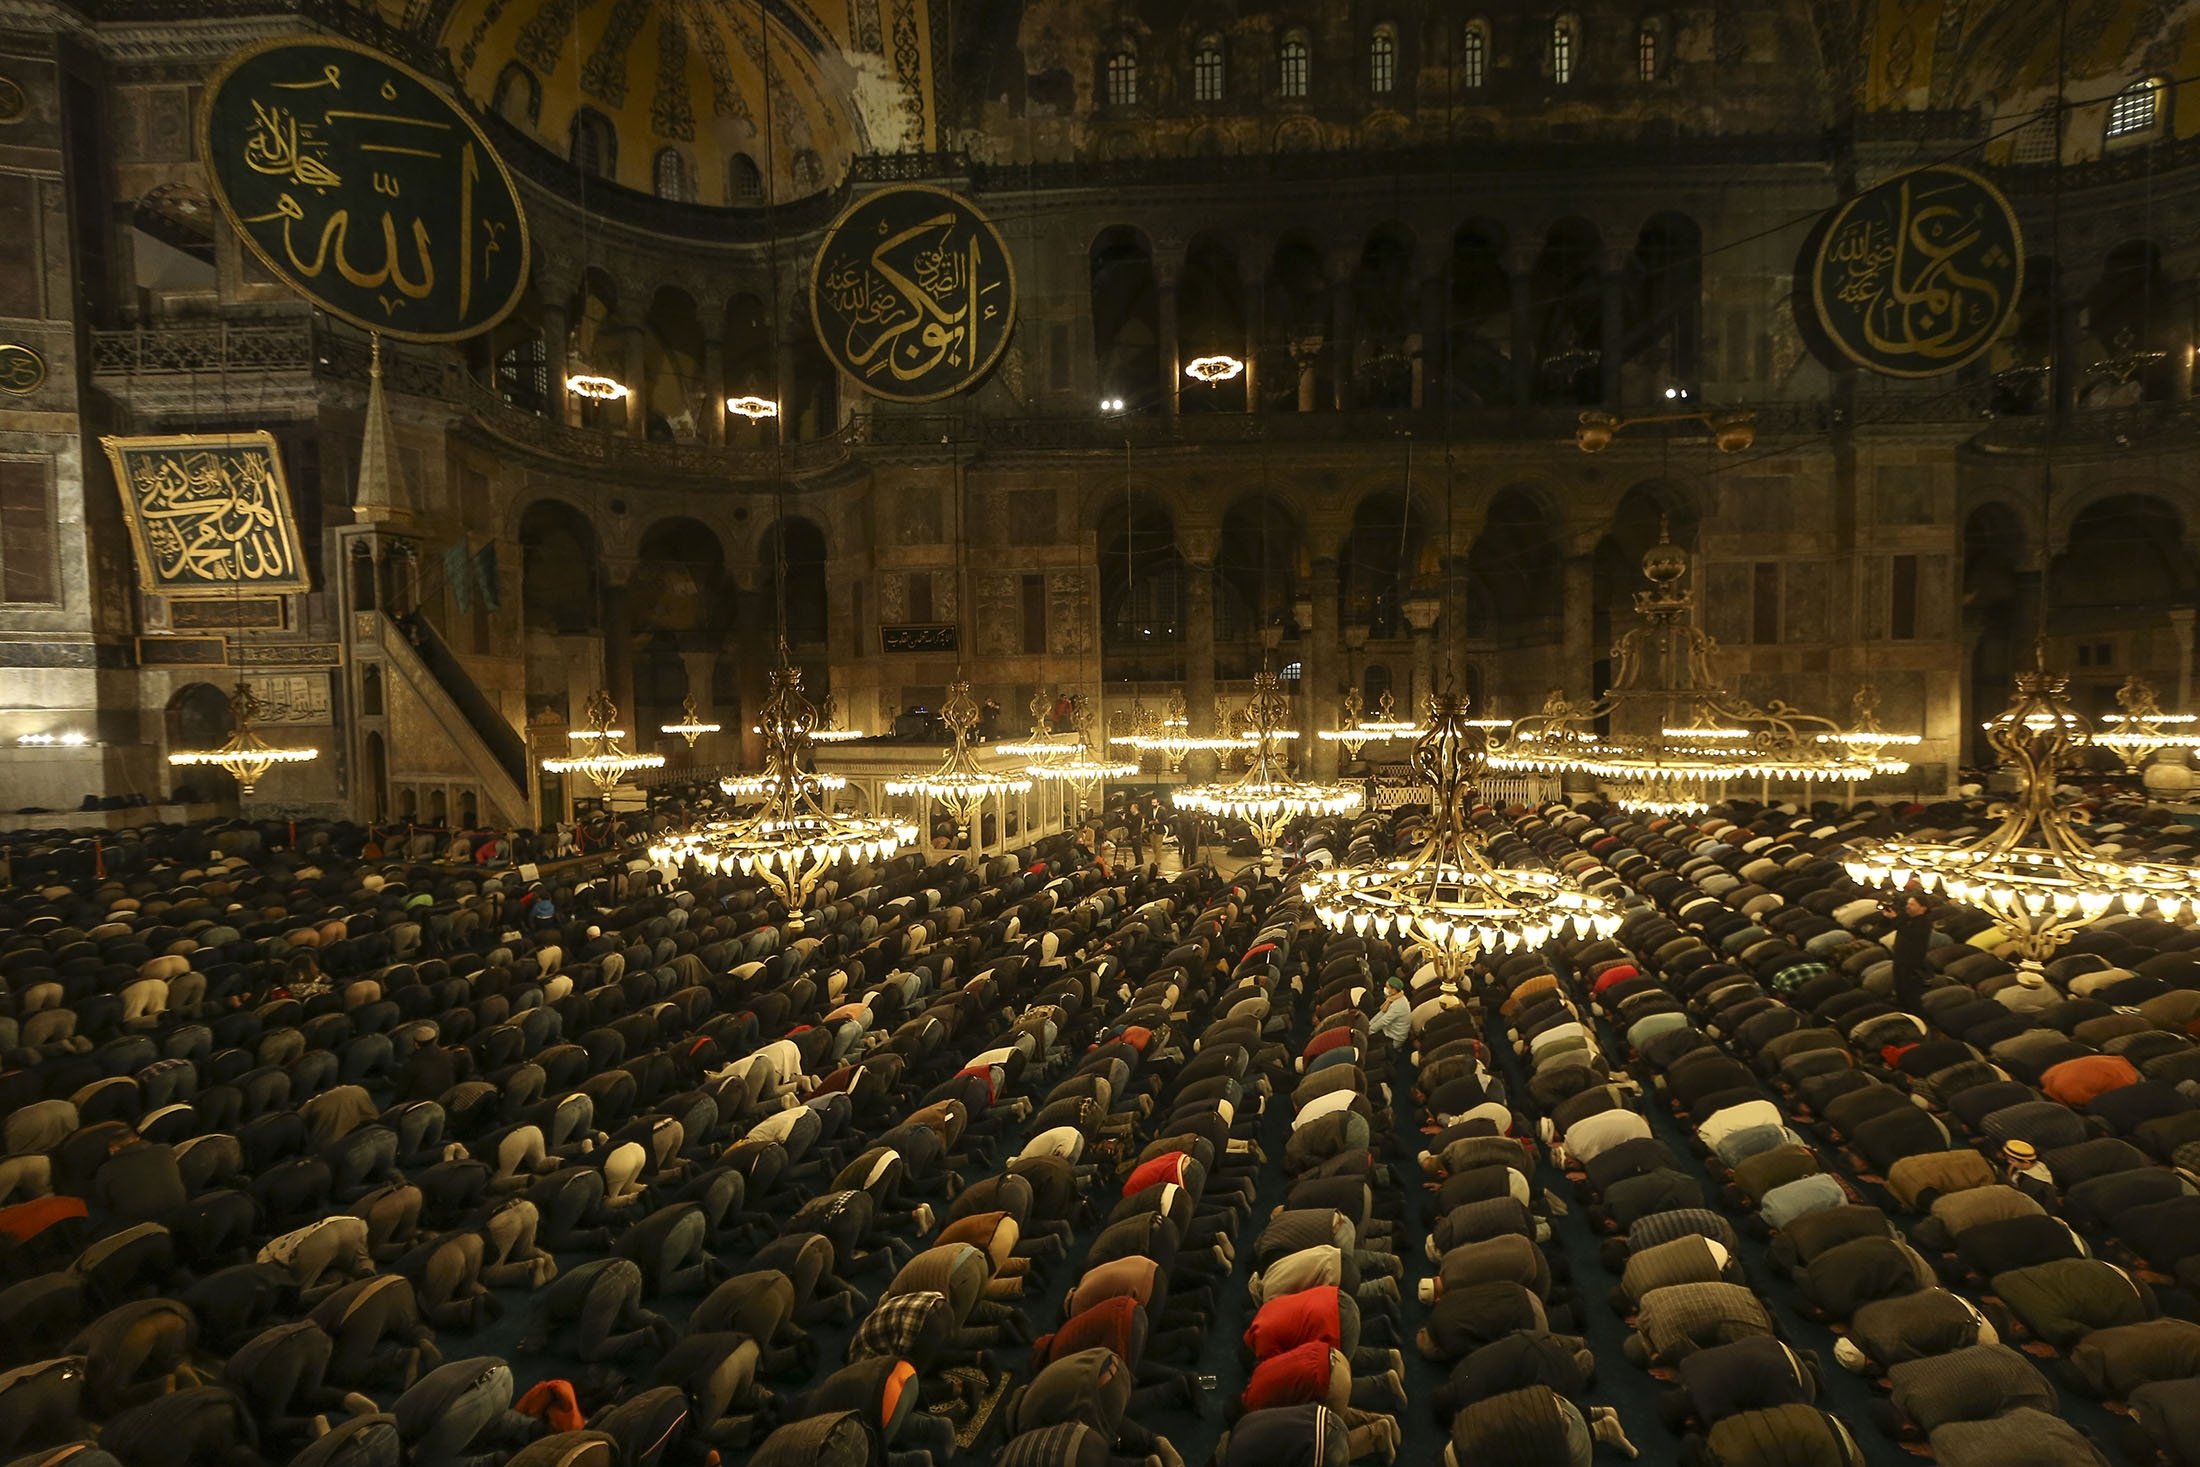 Muslim worshippers perform a night prayer called "tarawih" during the eve of the first day of the Muslim holy fasting month of Ramadan at Hagia Sophia Grand Mosque in Istanbul, Turkey, April 1, 2022. (AP Photo)